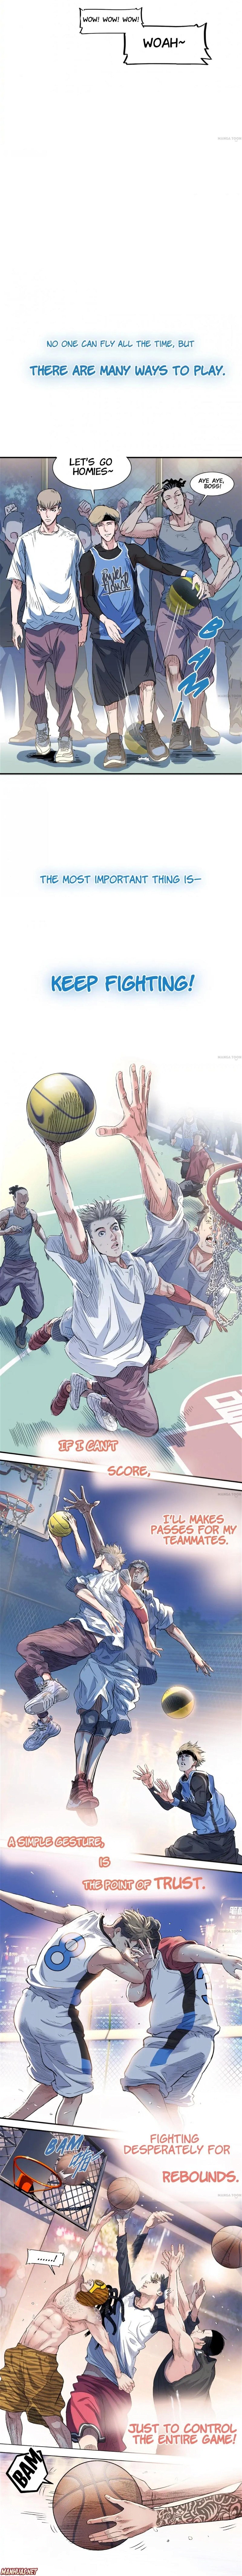 Streetball in the Hood Chapter 1 - Page 1